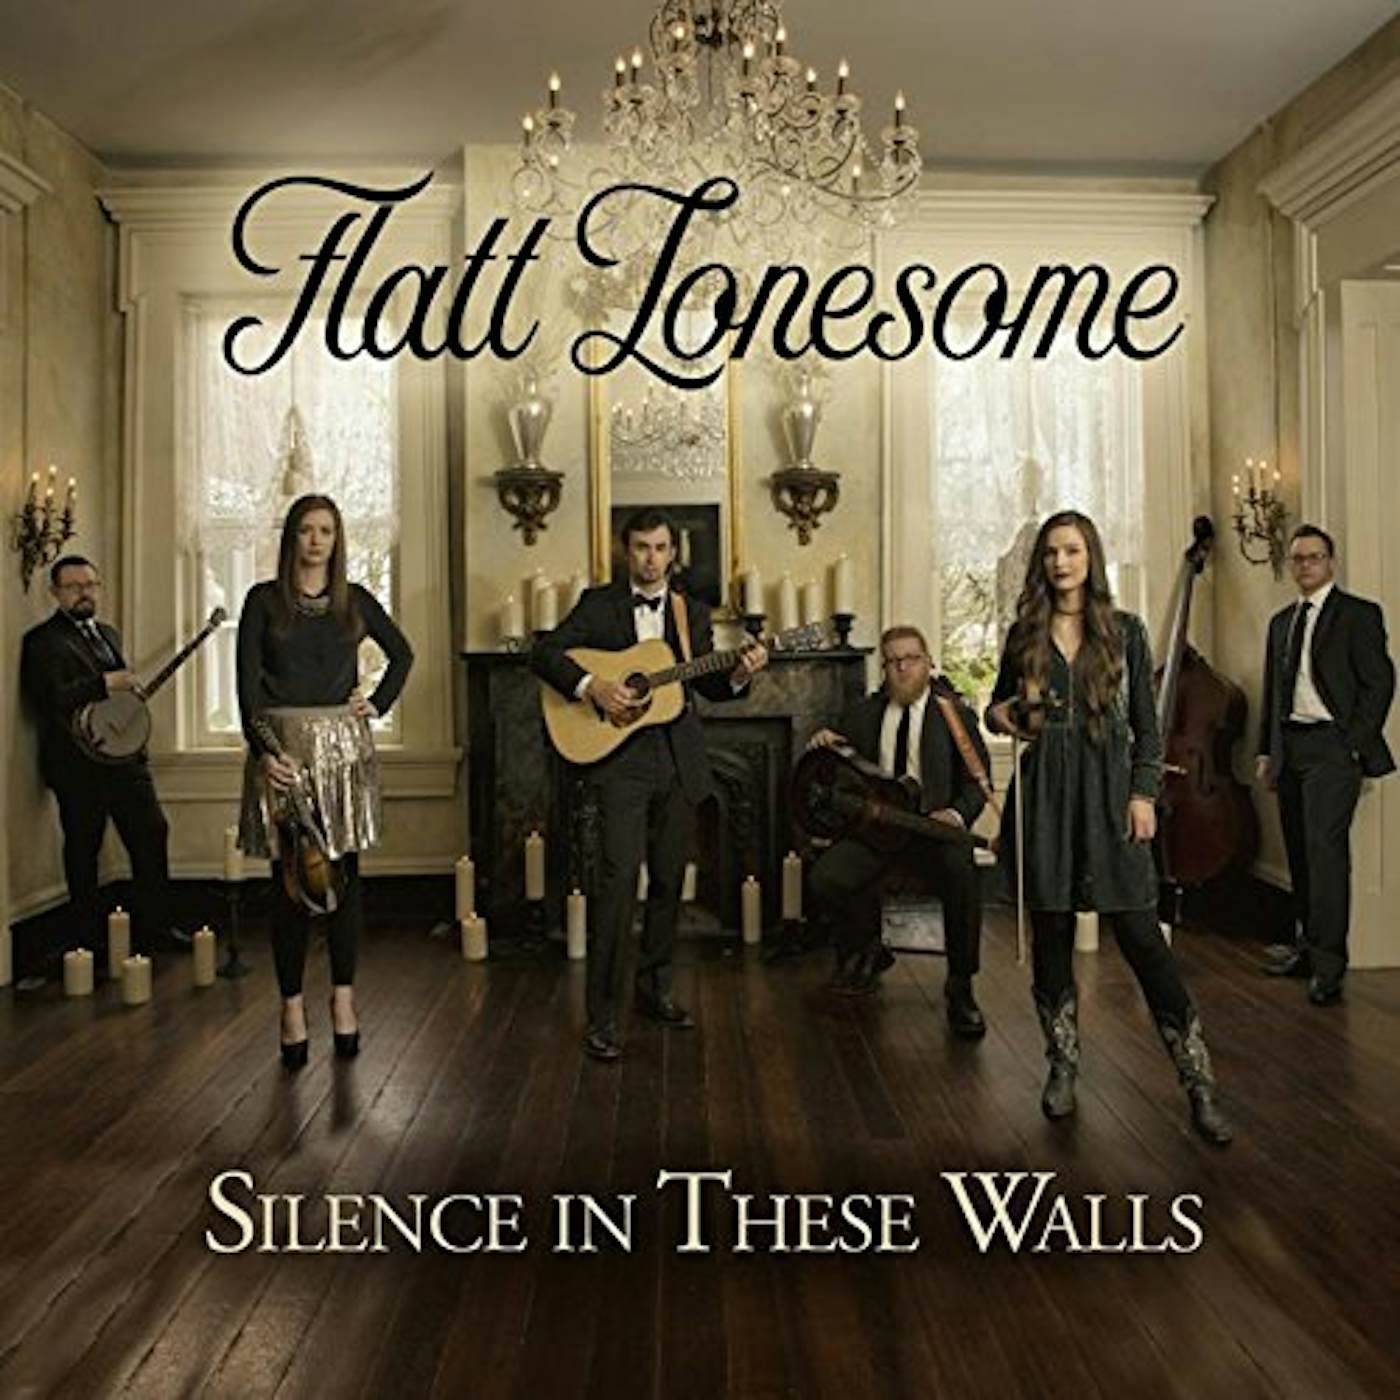 Flatt Lonesome SILENCE IN THESE WALLS CD